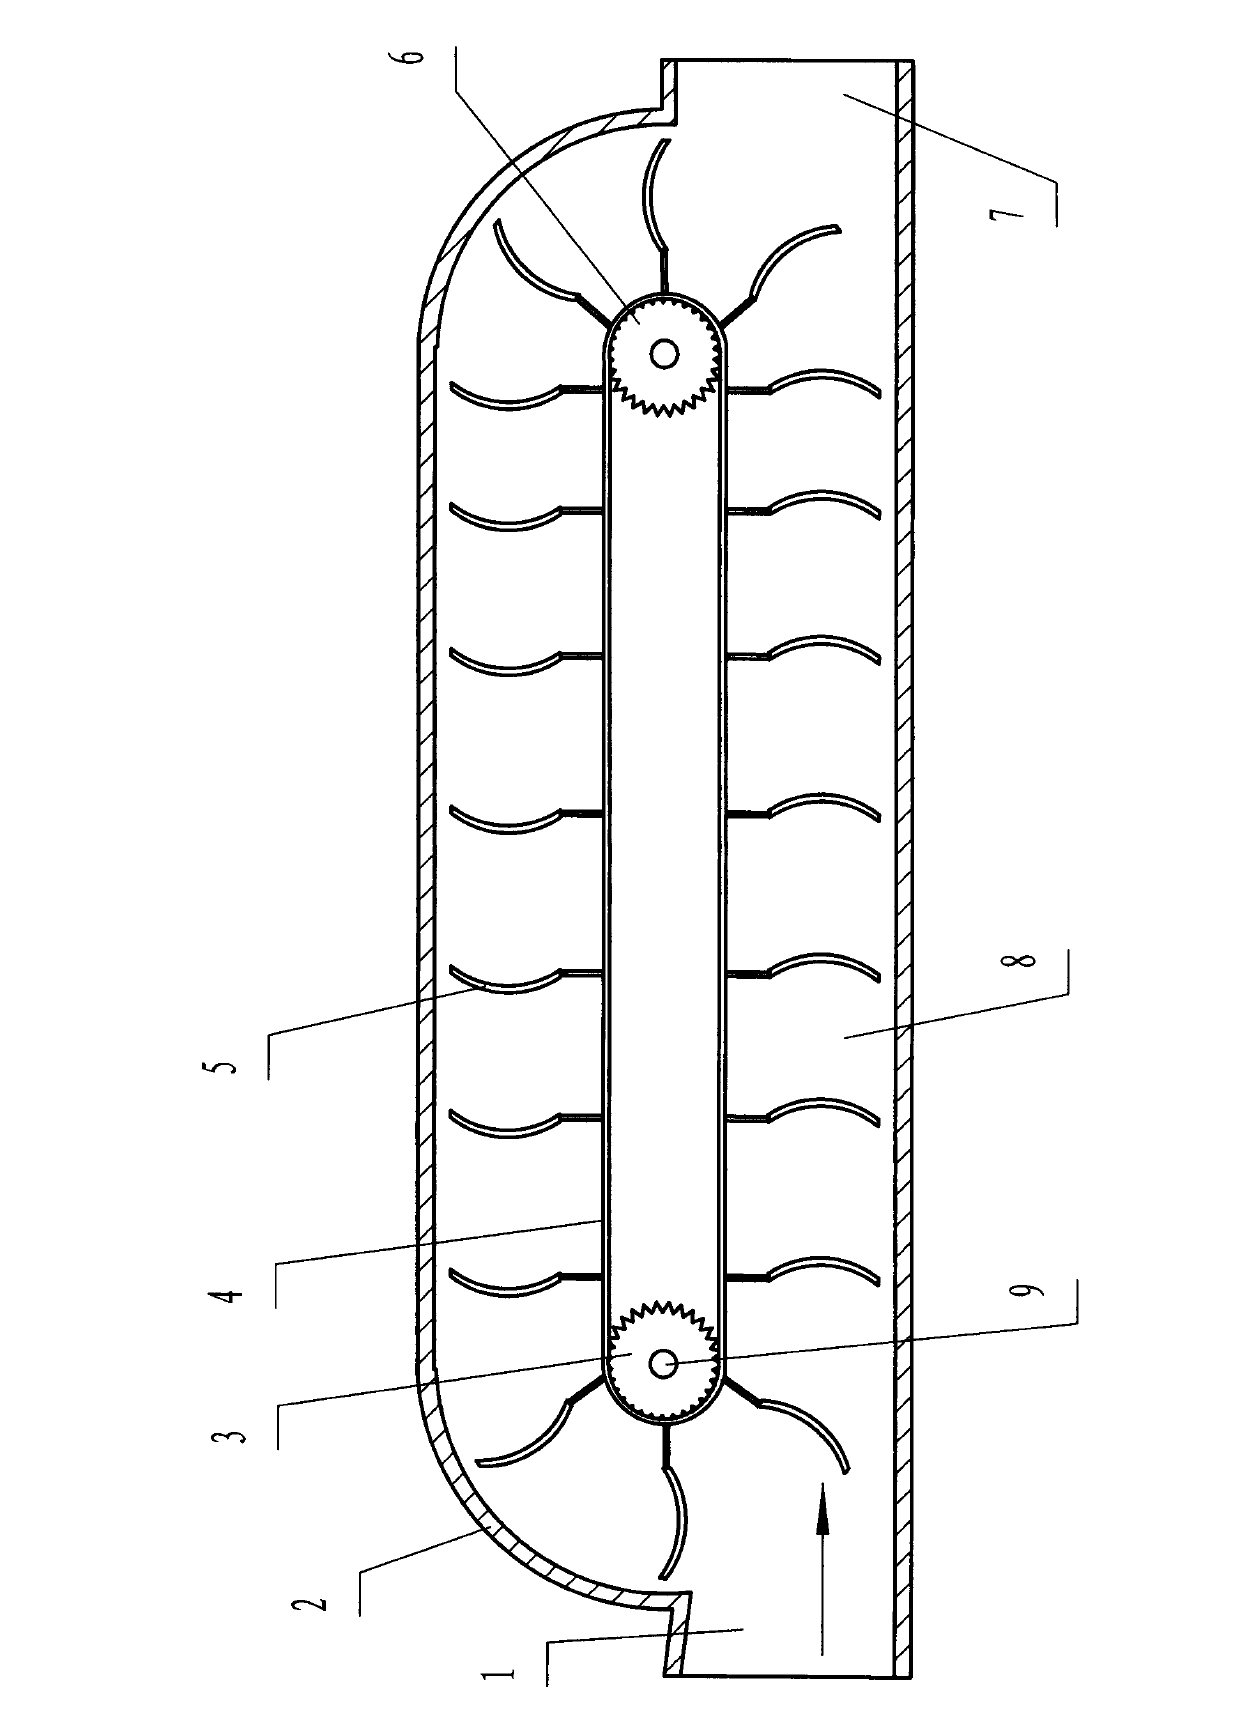 Device for converting kinetic energy of liquid into mechanical energy